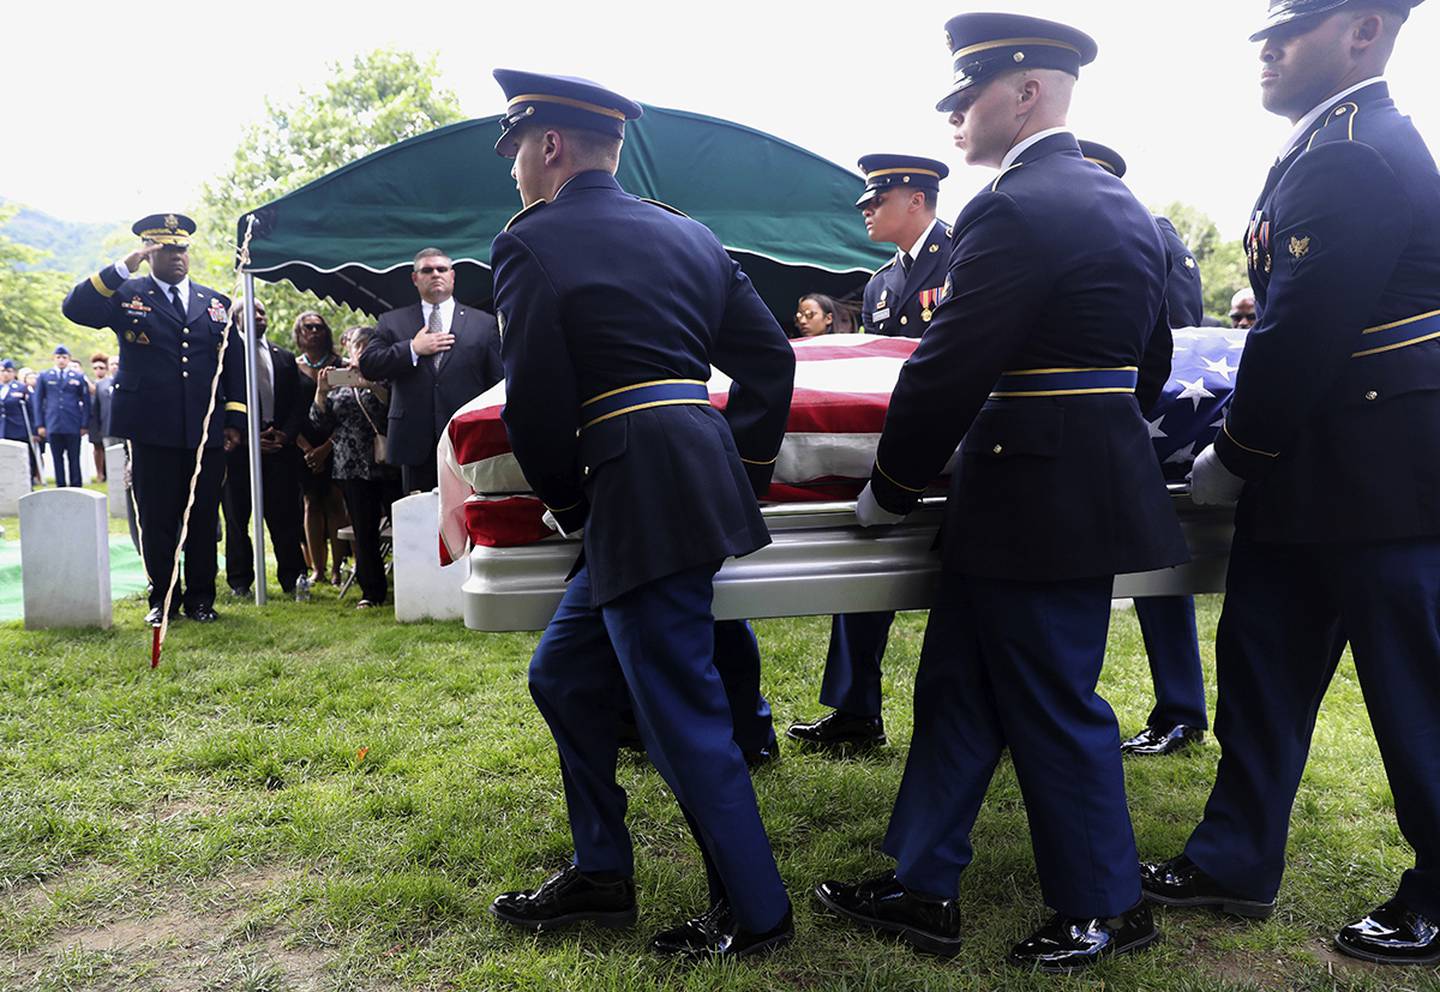 Superintendent Darryl Williams, back left, salutes as the Military honor guard carry the casket of West Point Cadet Christopher J. Morgan, during the interment ceremony at West Point, N.Y.